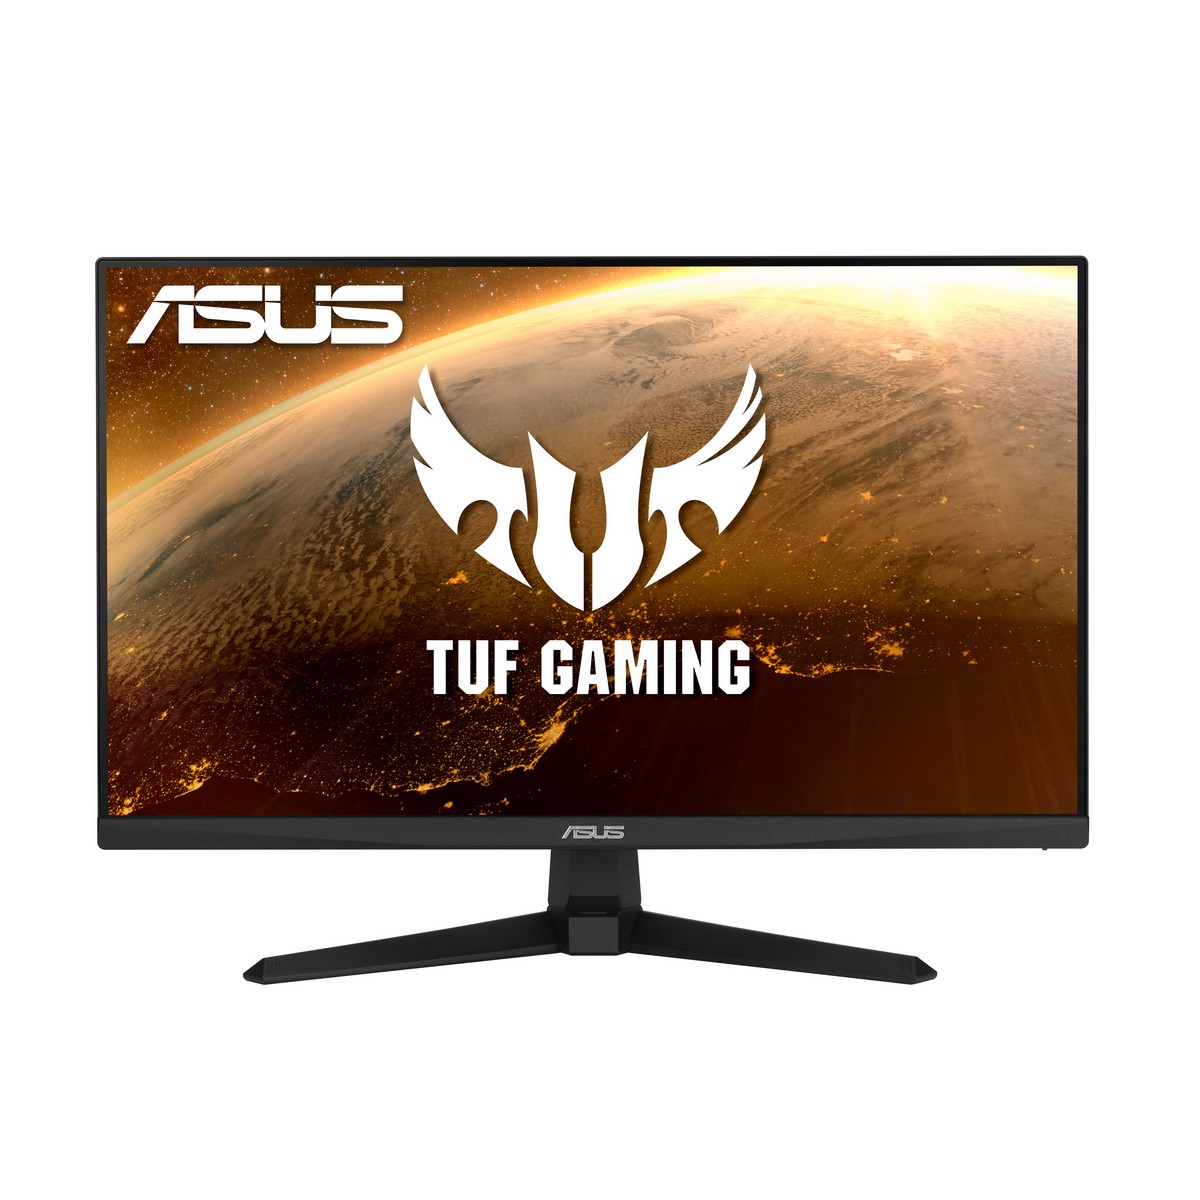 Asus - ASUS 24" TUF Gaming VG249Q1A FHD IPS 165Hz 1ms FreeSync/G-Sync Widescreen Gaming Monitor